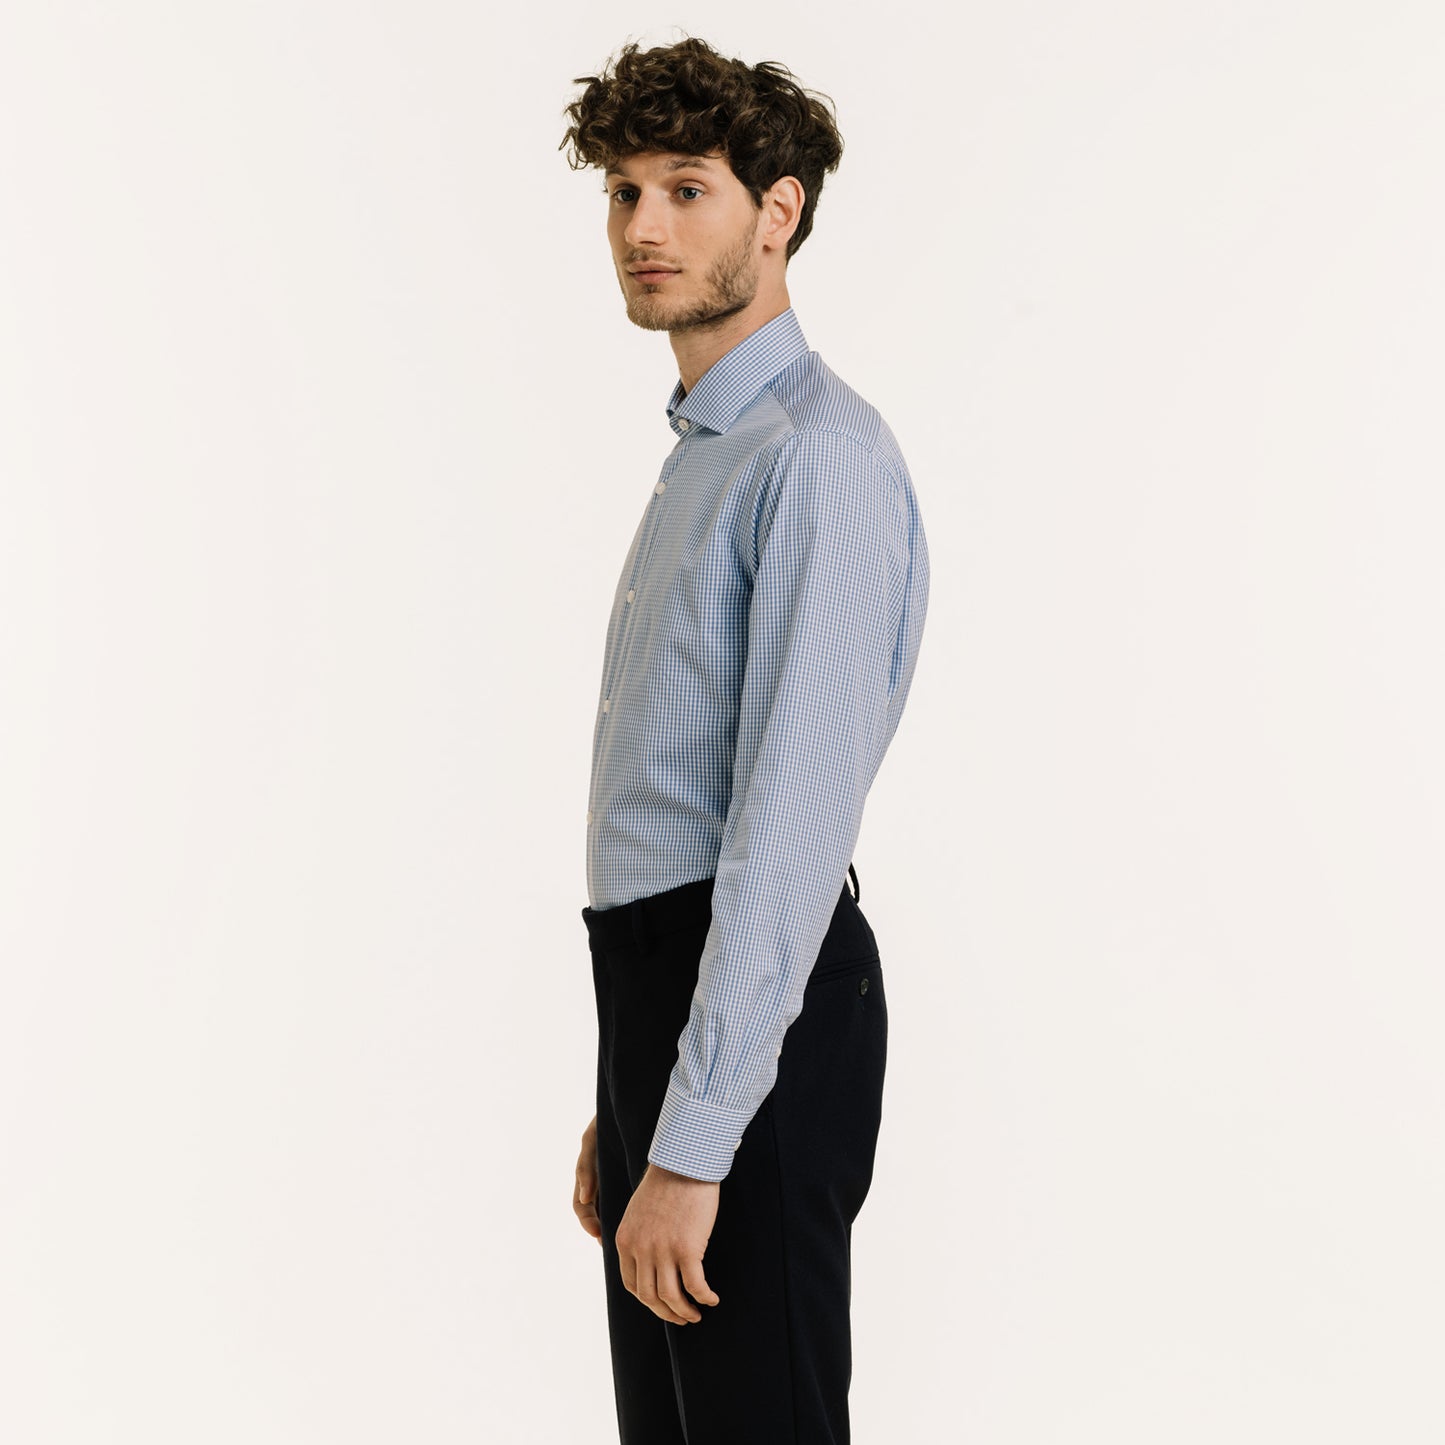 Fitted shirt in blue double-twisted gingham poplin